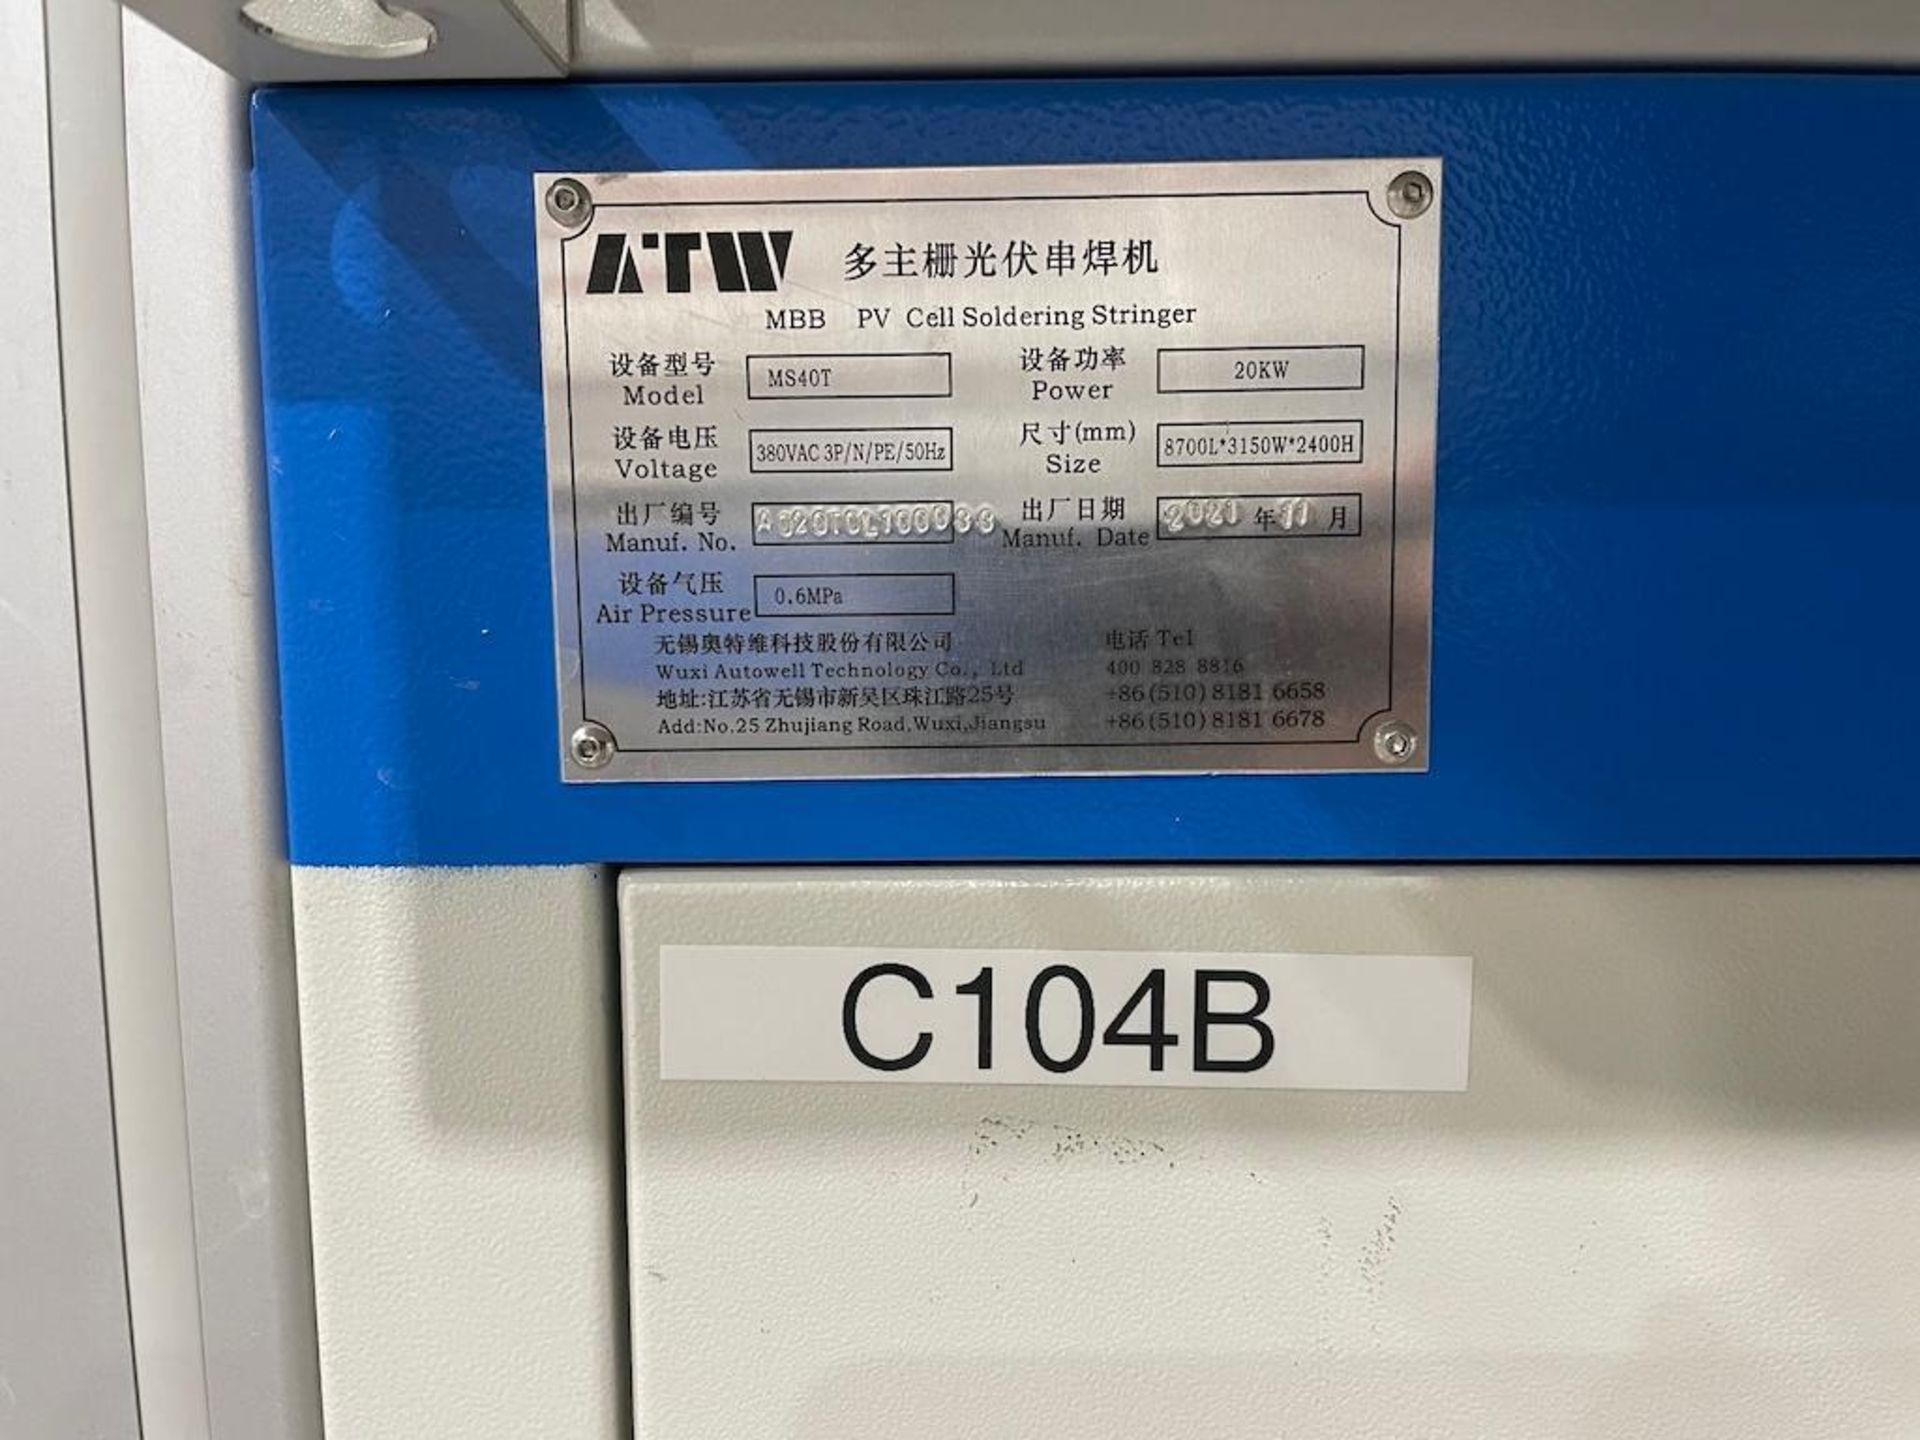 2021 ATW MS40T SERIES MULTI BUSBAR PV CELL SOLDERING STRINGER, SIZE: 8700L X 3150 W X 2400 H, (2) EP - Image 15 of 17